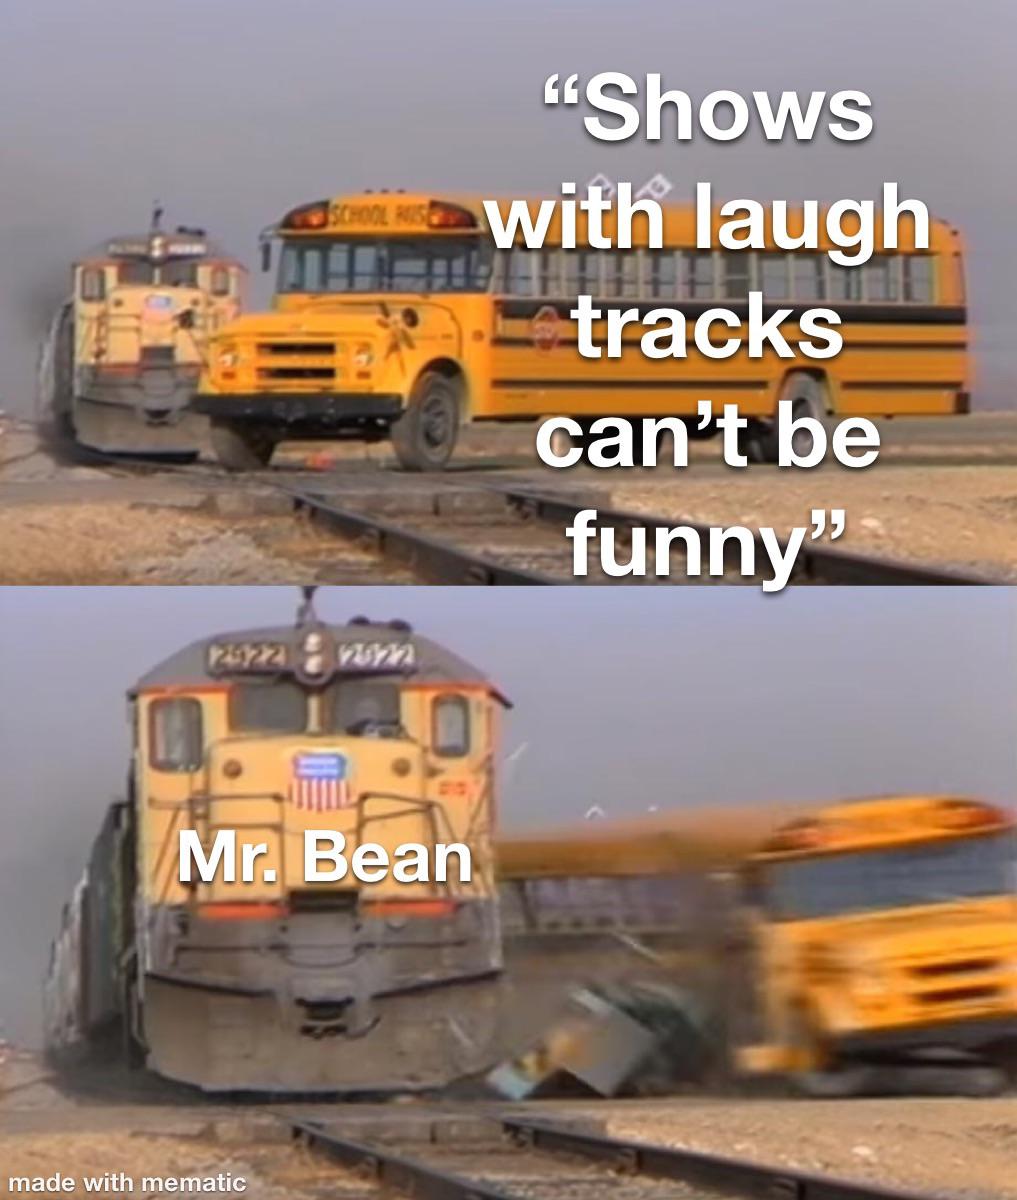 dank memes - school bus hit by train - 2022 School Huse Mr. Bean made with mematic "Shows with laugh 17011 tracks can't be funny"